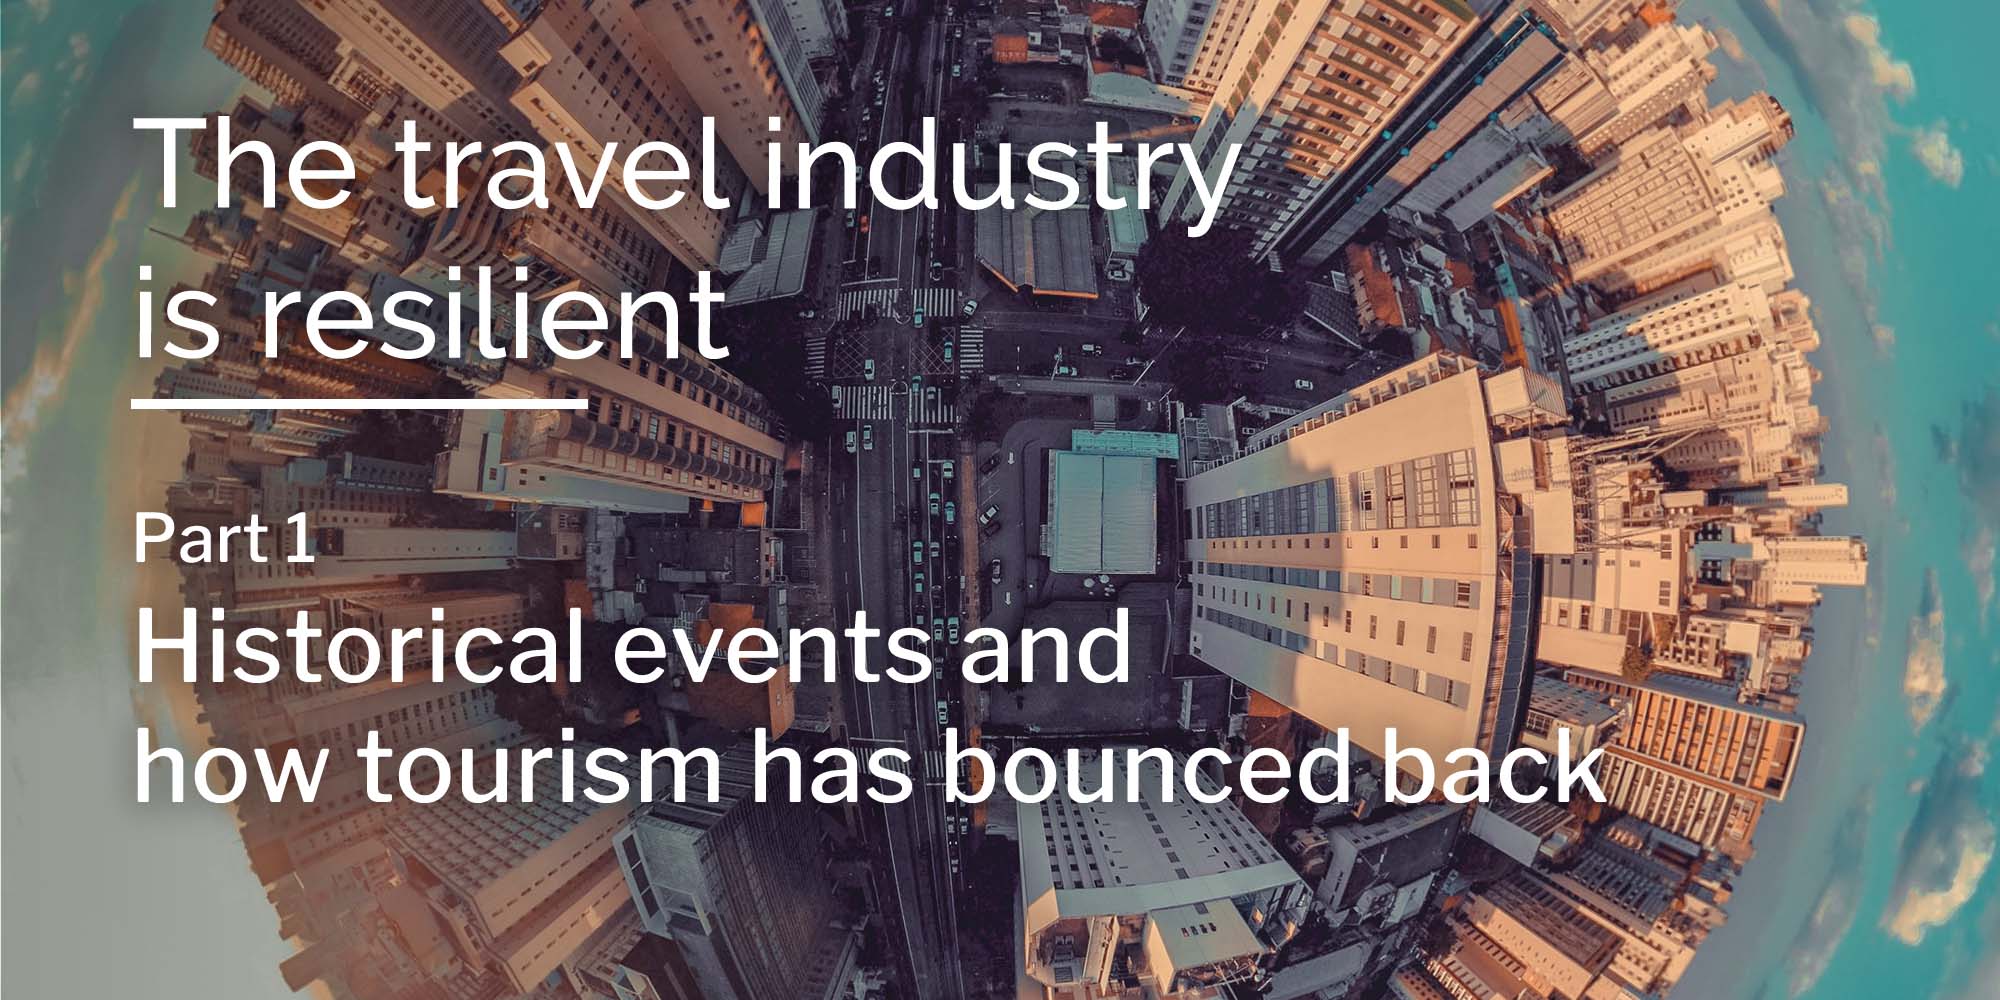 The travel industry is resilient: Historical events and how tourism has bounced back